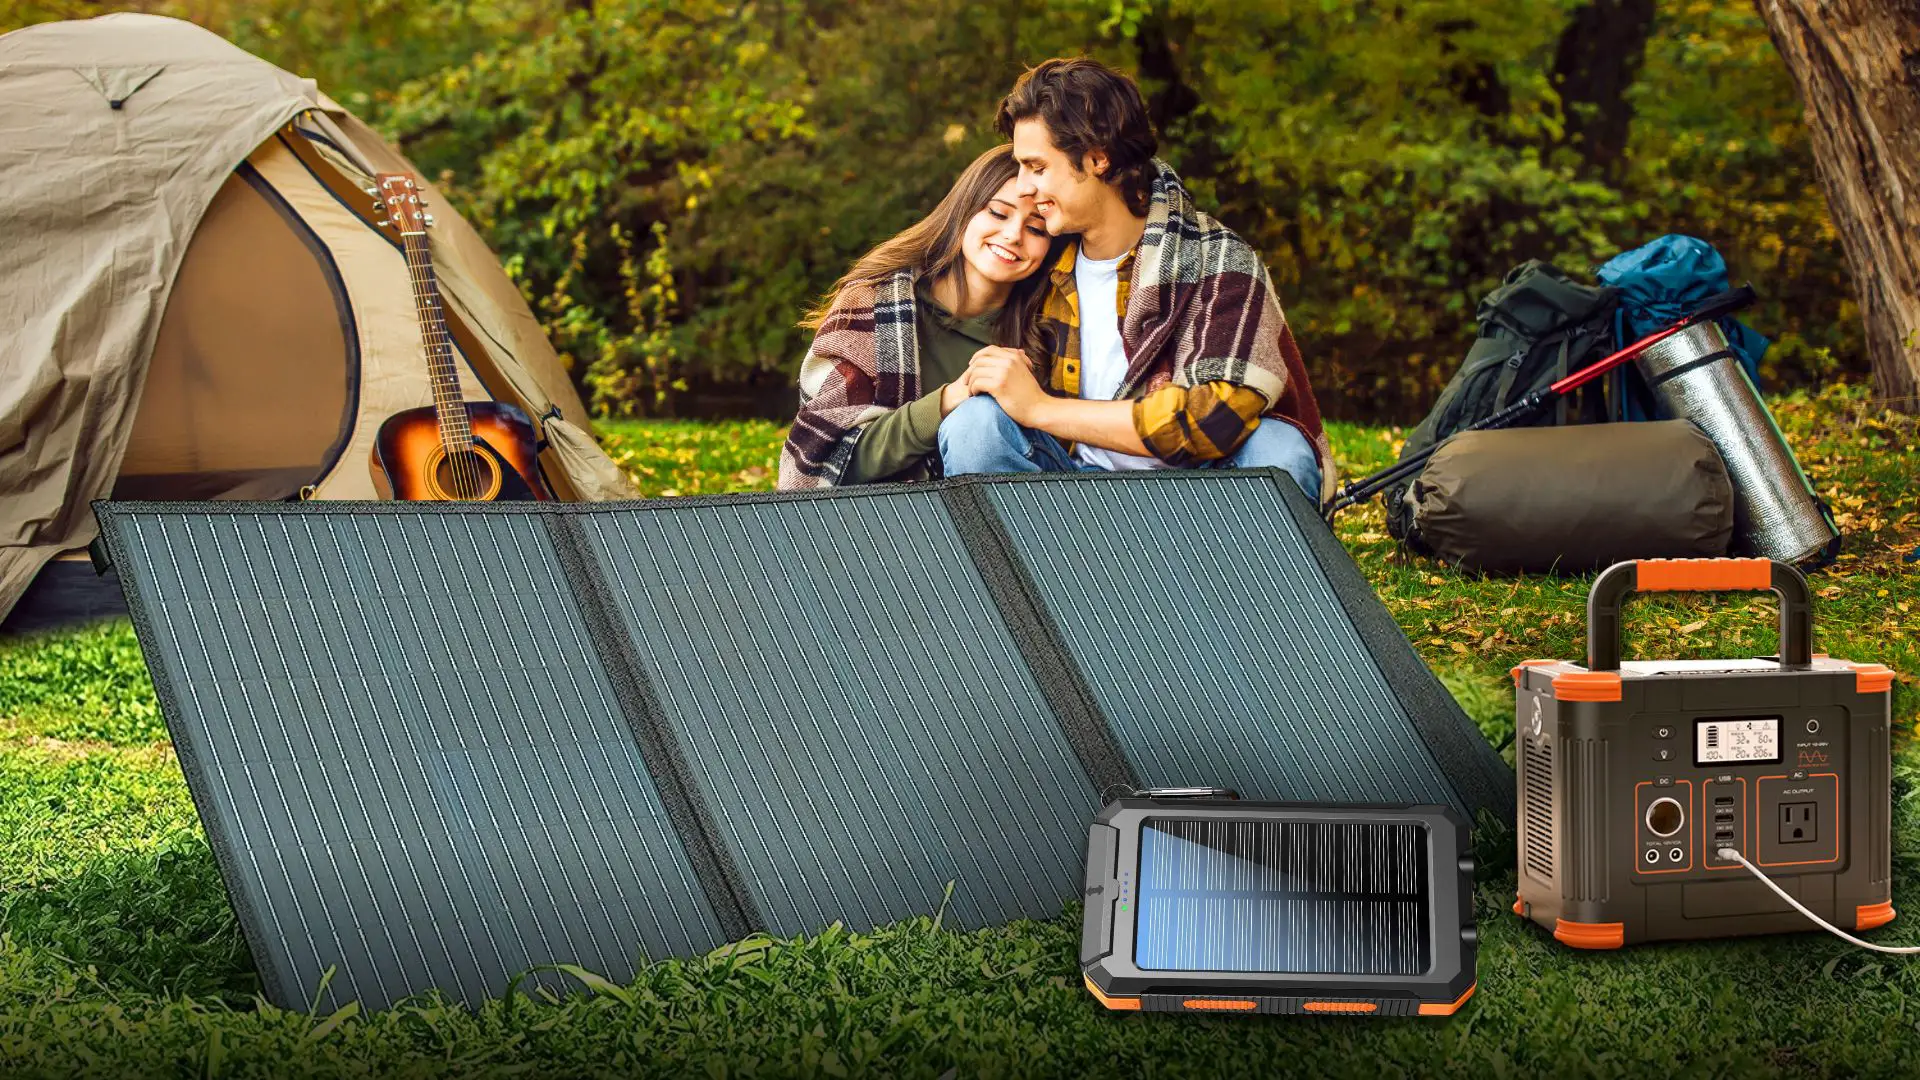 Steps to use external portable solar panels to charge a solar power bank